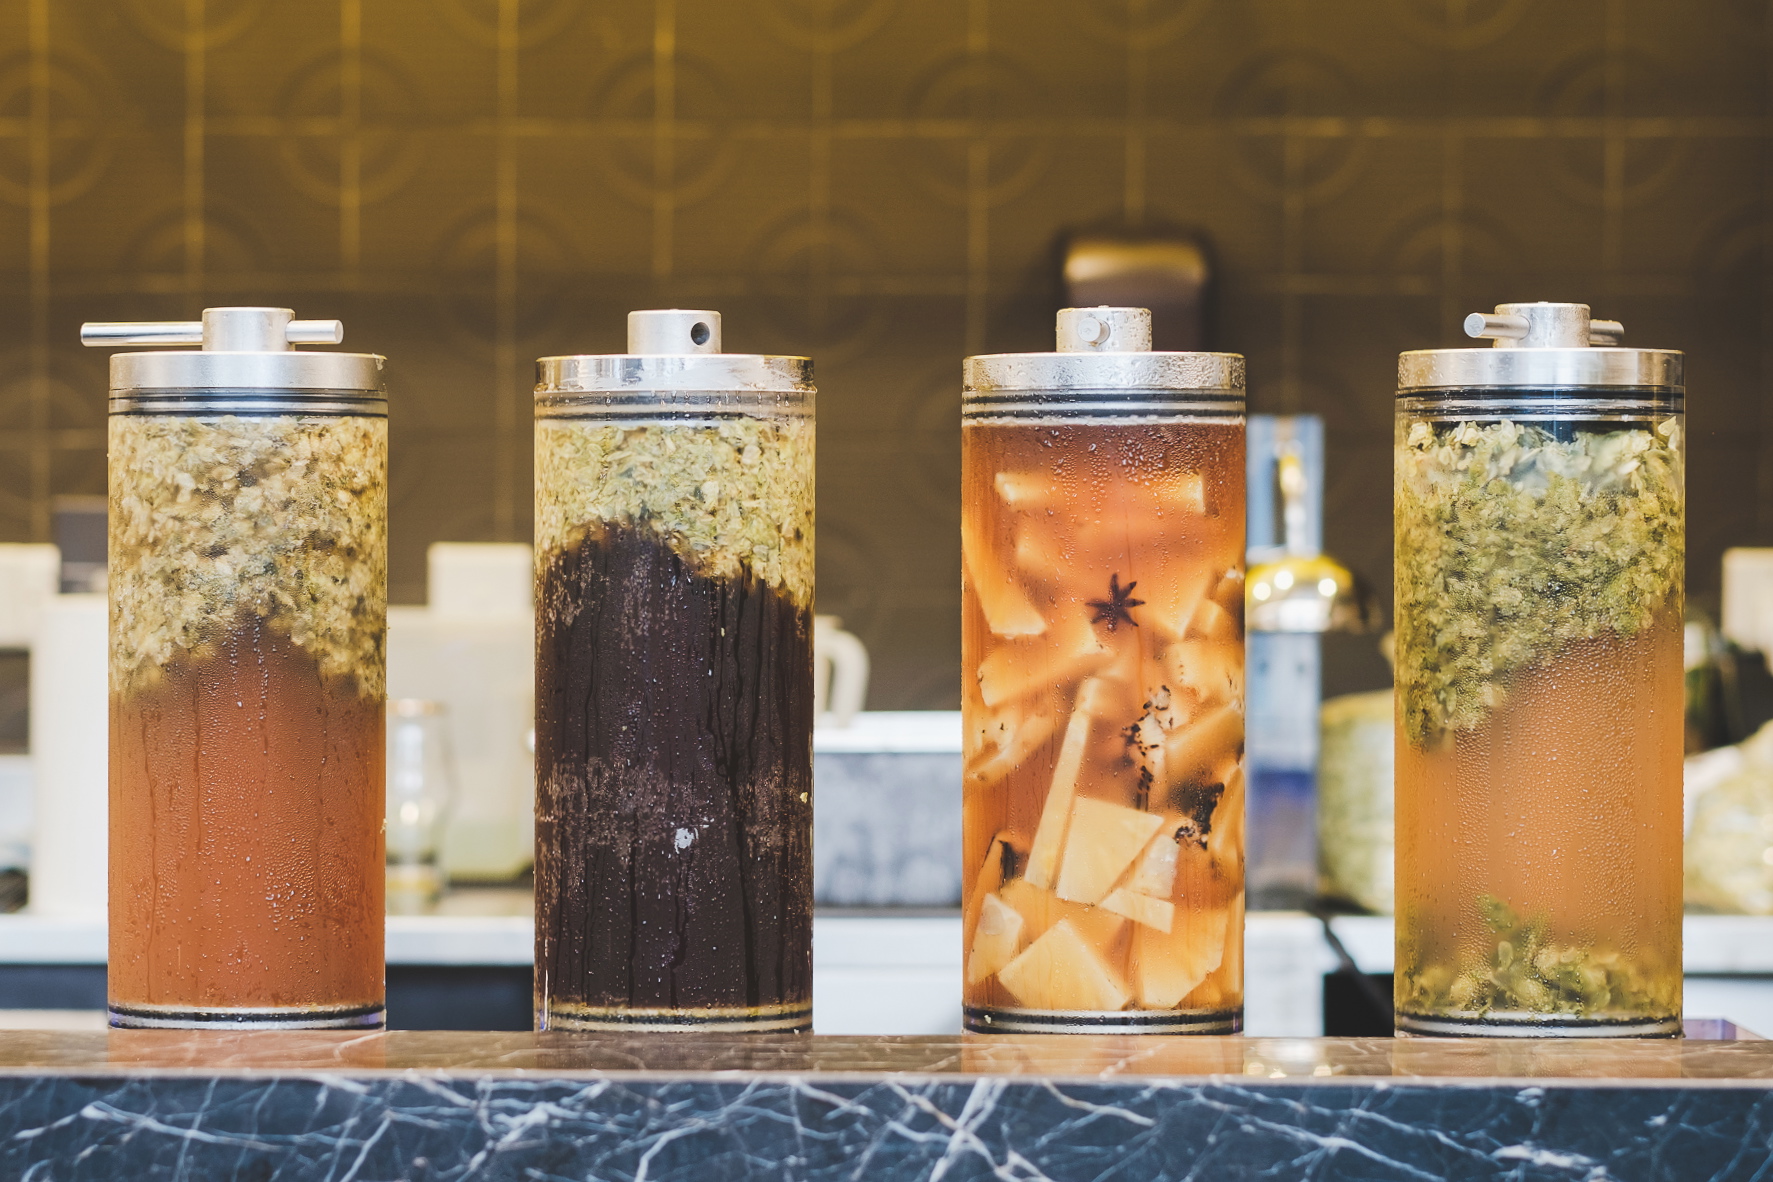 The Alchemist Lab in Singapore serves infusion beers and bites